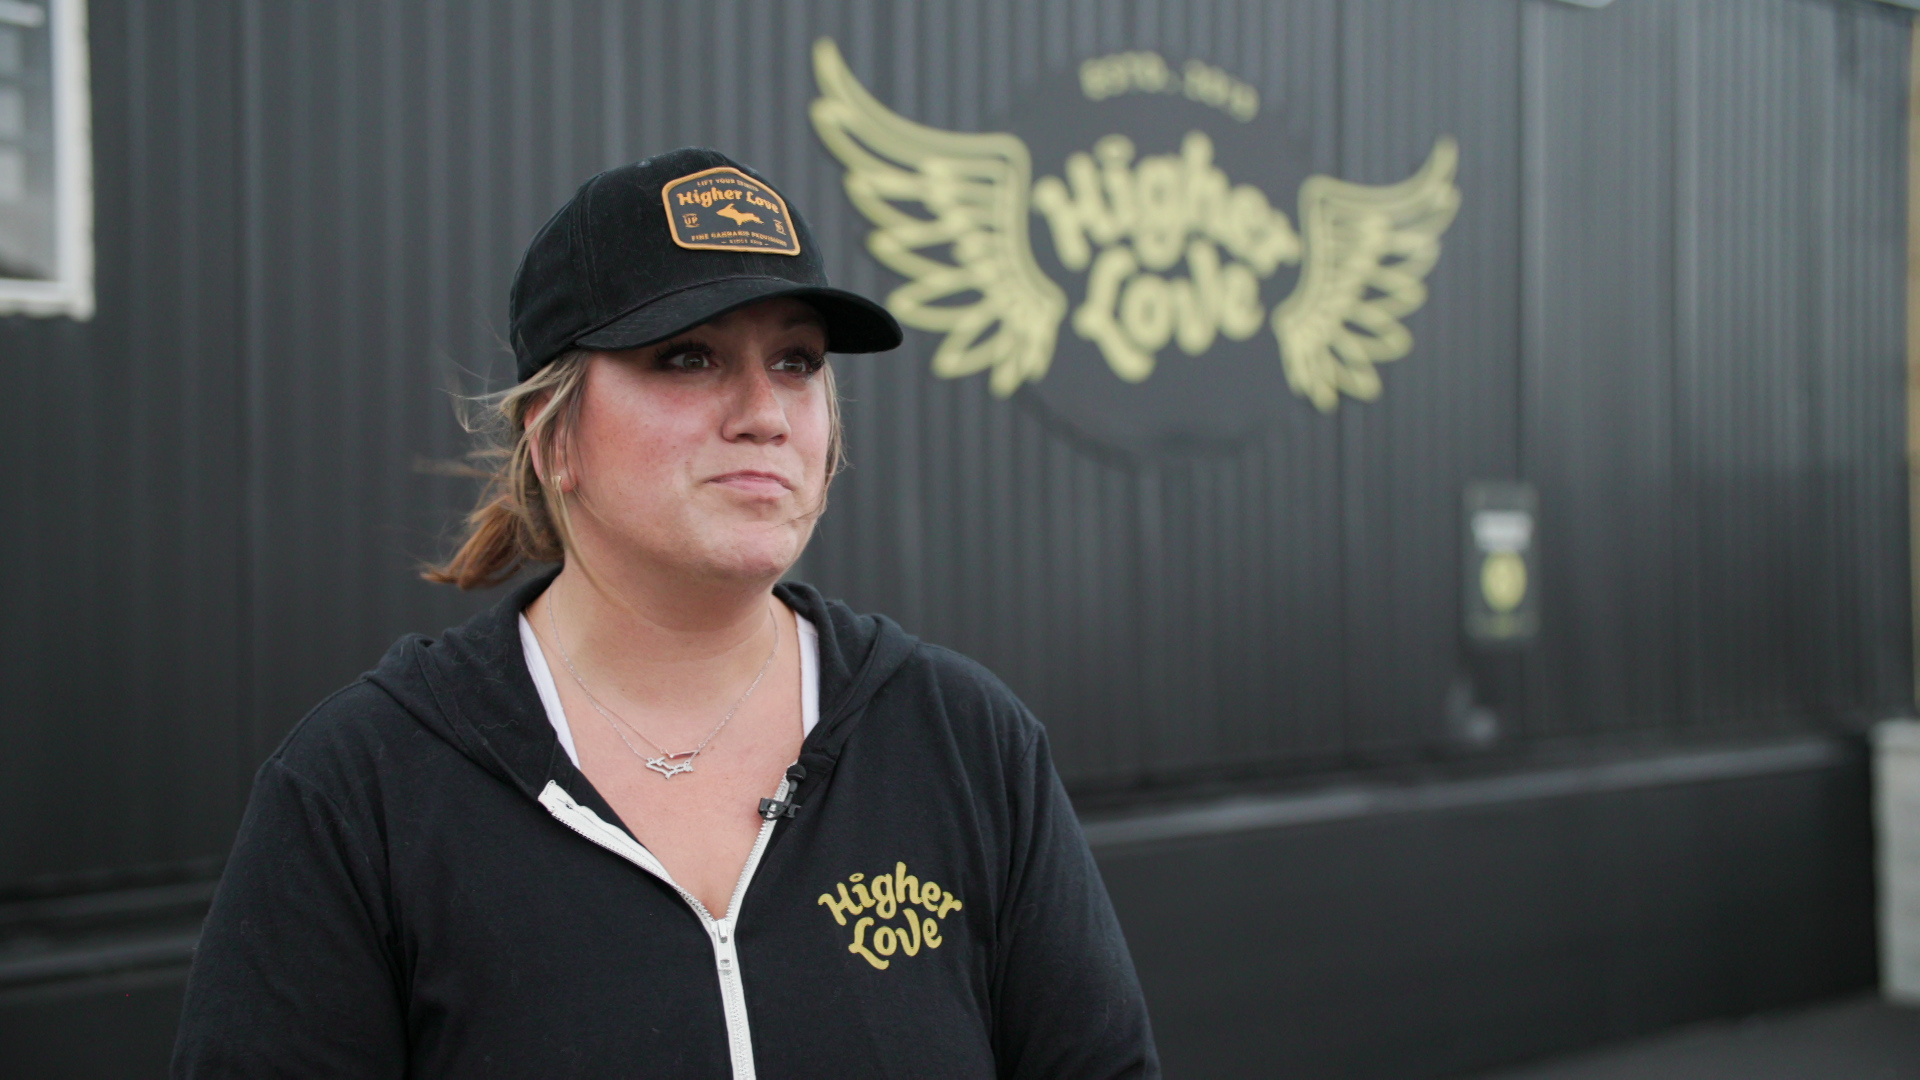 Lindsay Martwick stands outside in front of an out-of-focus shipping container with a winged logo for Higher Love.